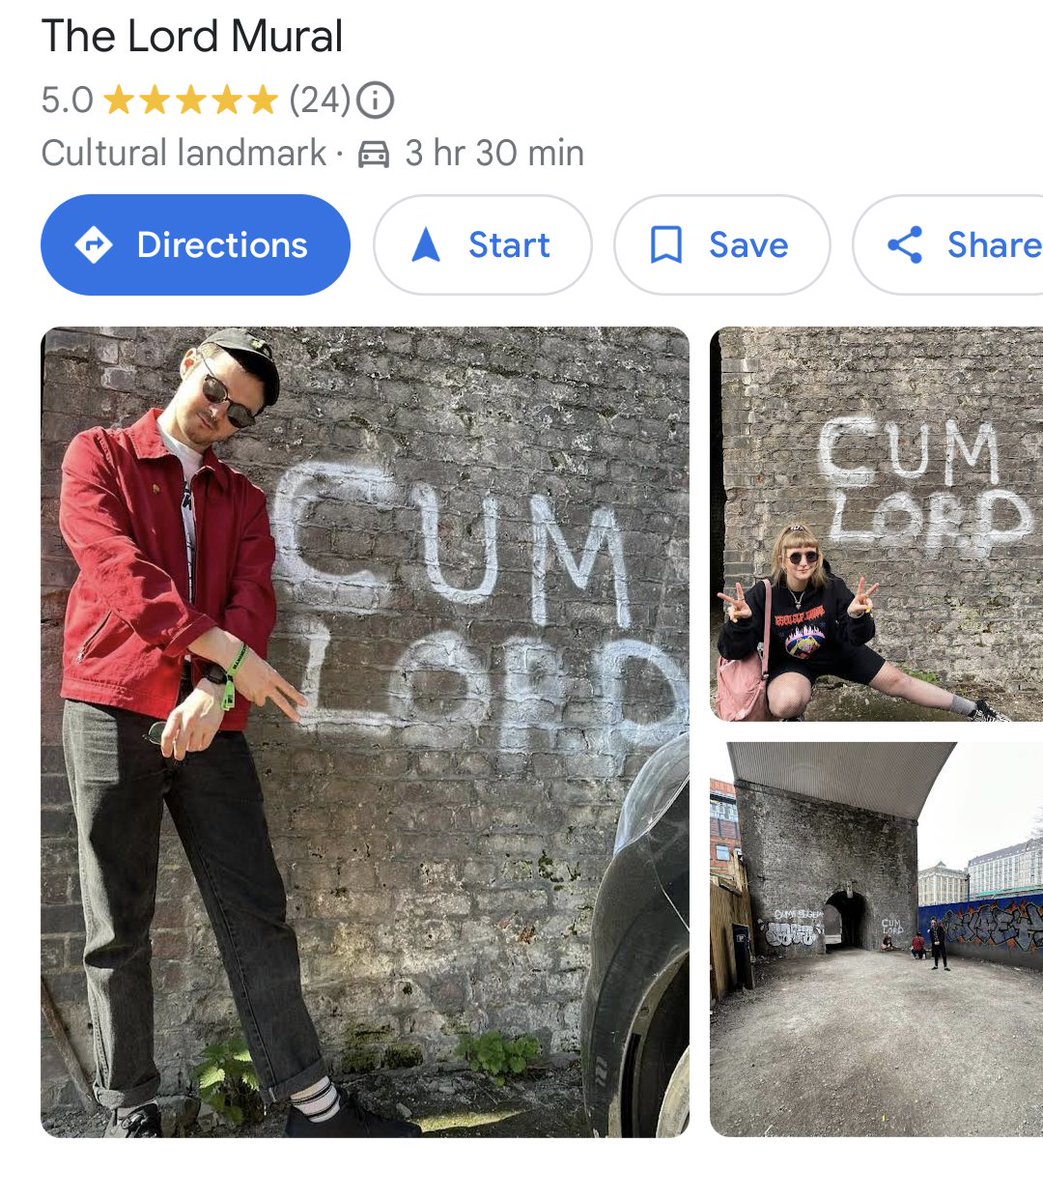 I love that all the pics at the CUM LORD mural are just Supermilk